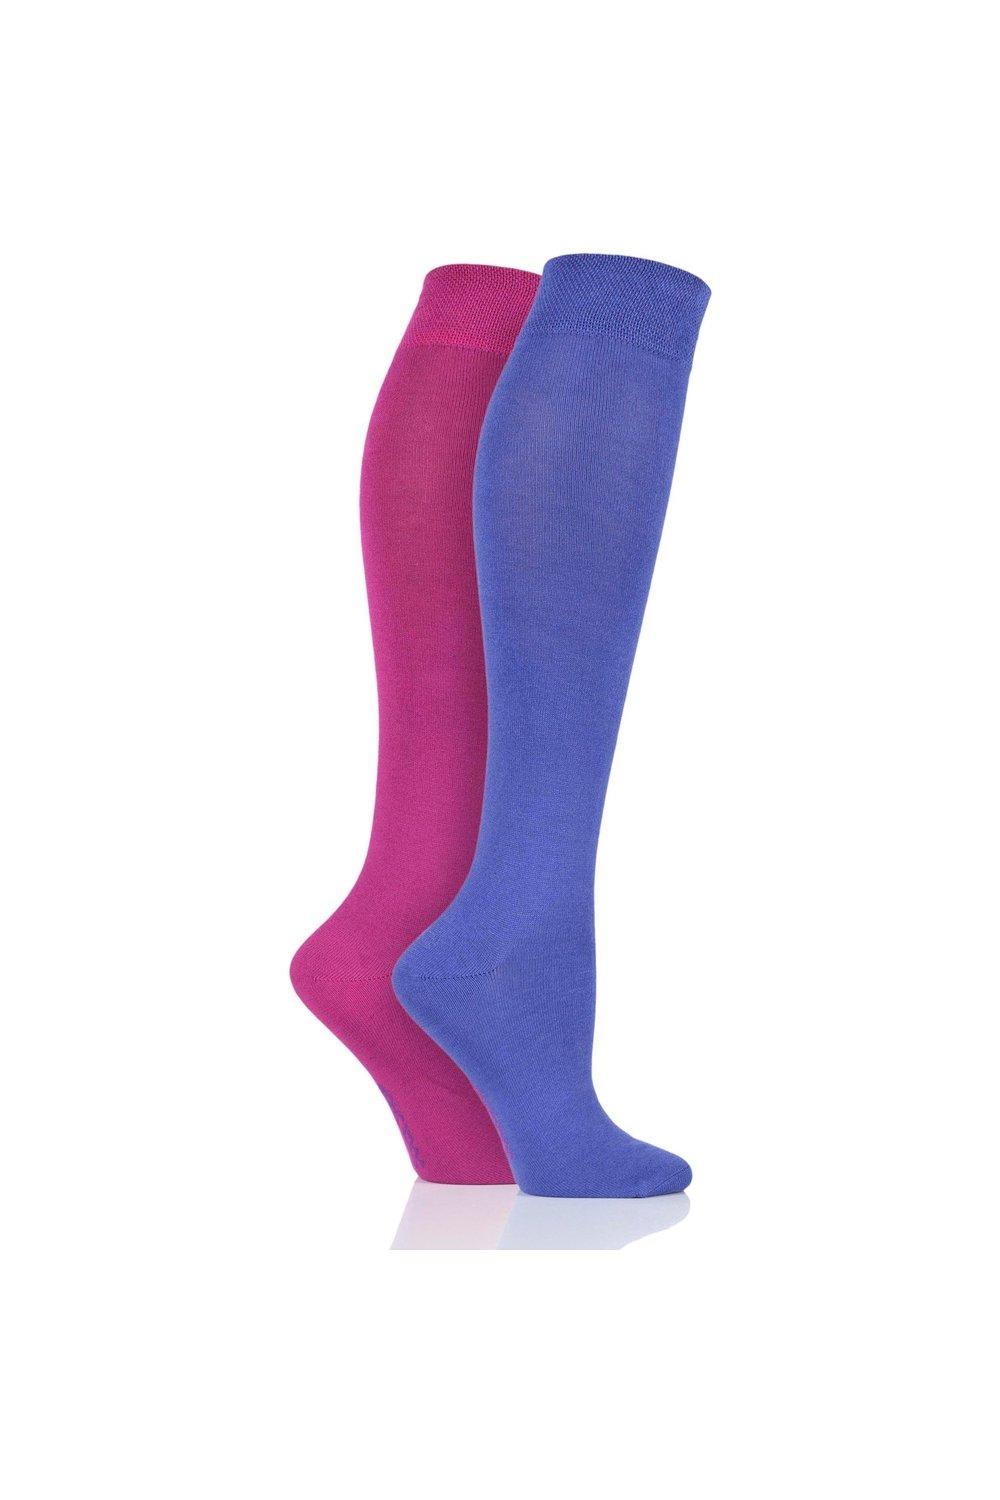 2 Pair Plain and Patterned Bamboo Knee High Socks with Smooth Toe Seams